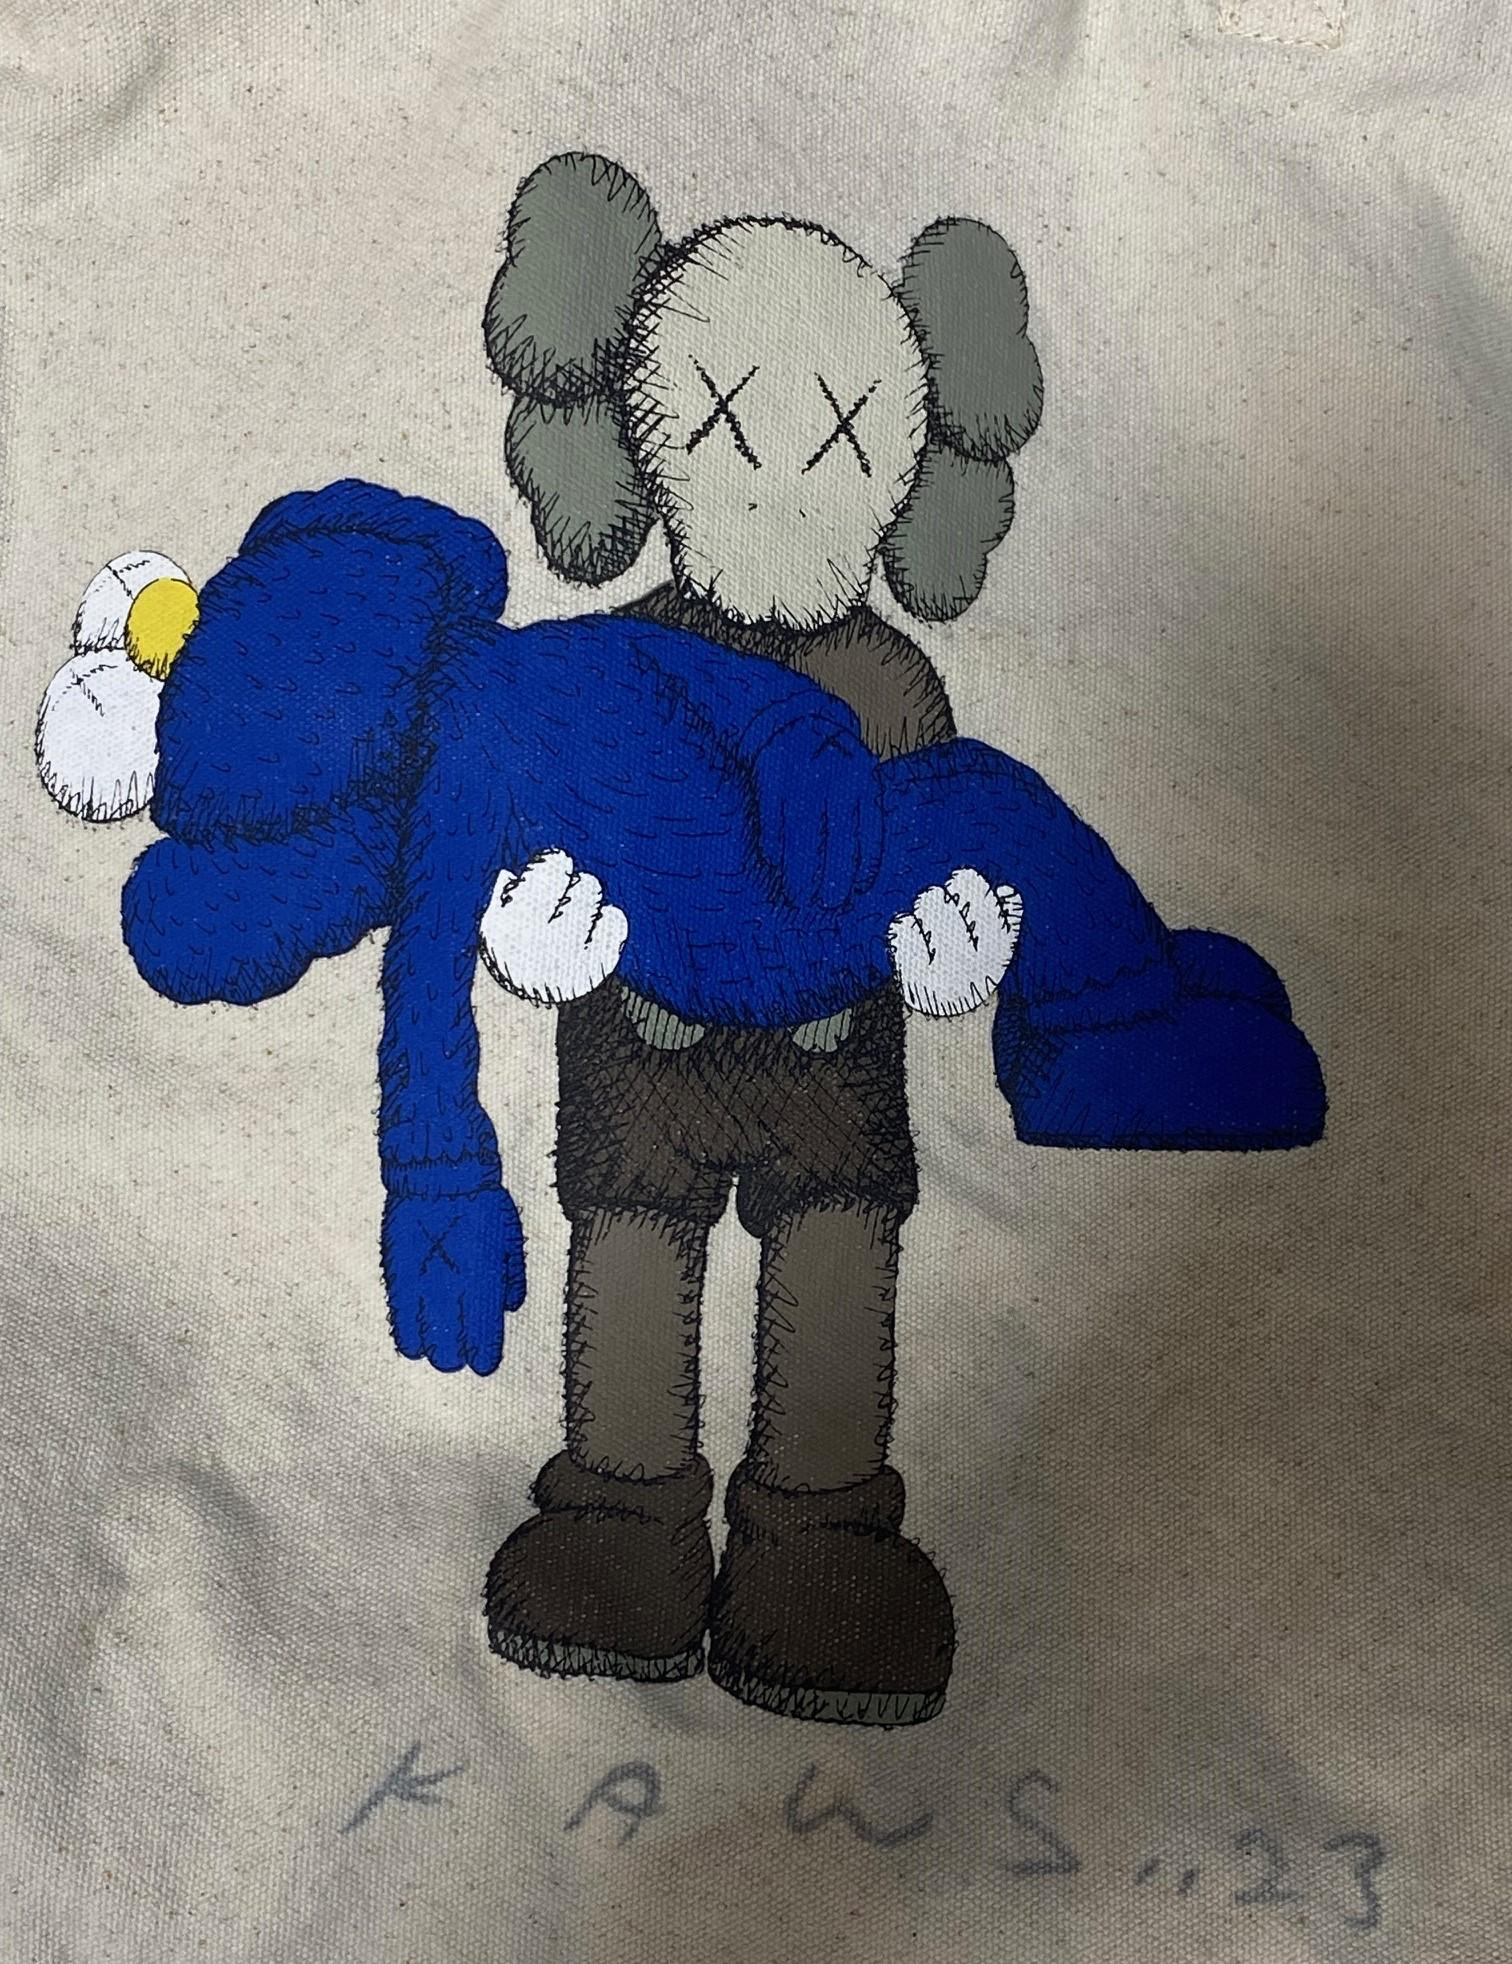 Modern KAWS Brian Donnelly Rare Signed Natural Canvas Uniqlo X Tote Shopping Bag Gone For Sale